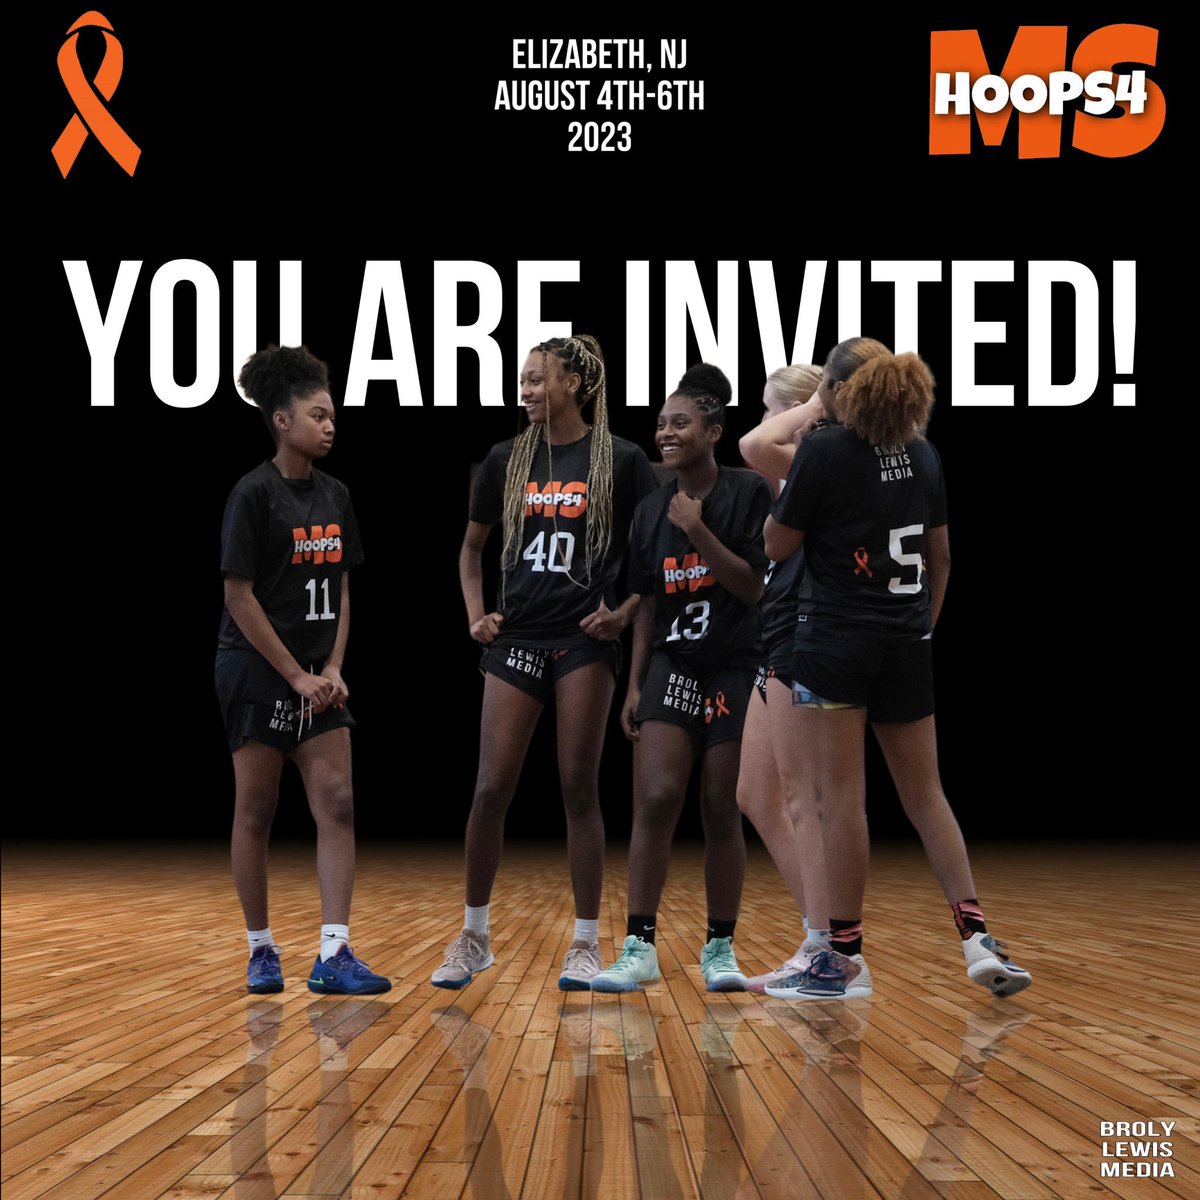 Thank you for the invite @brolymedia @Hoops4Ms! I’m looking forward to competing for a great cause!